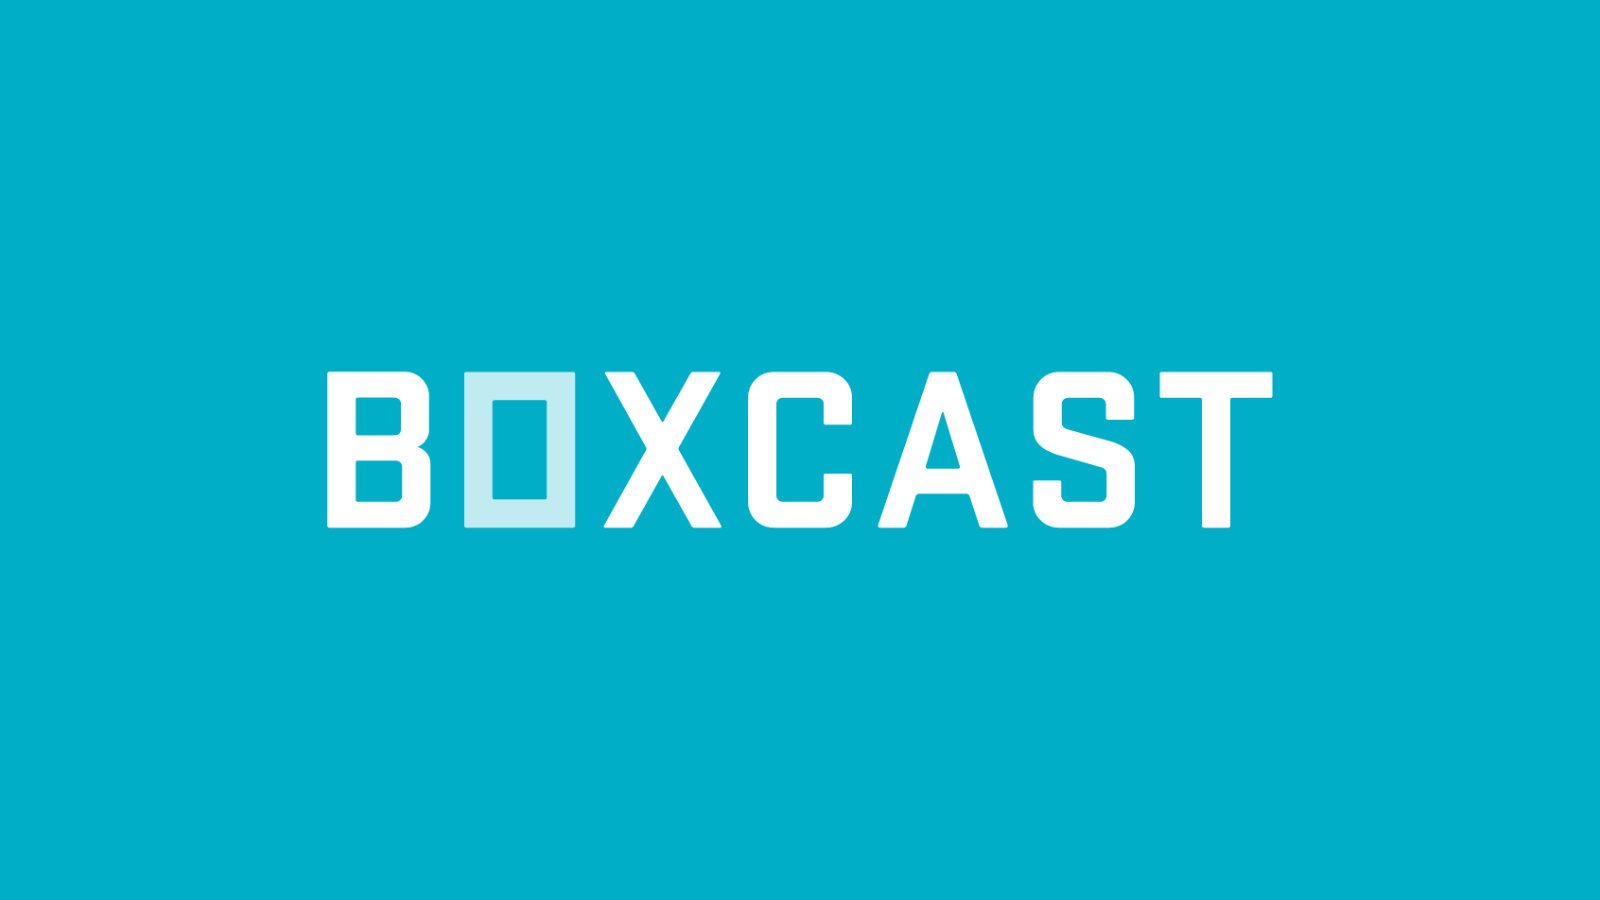 BoxCast Engagement and Outreach Ministry Platform